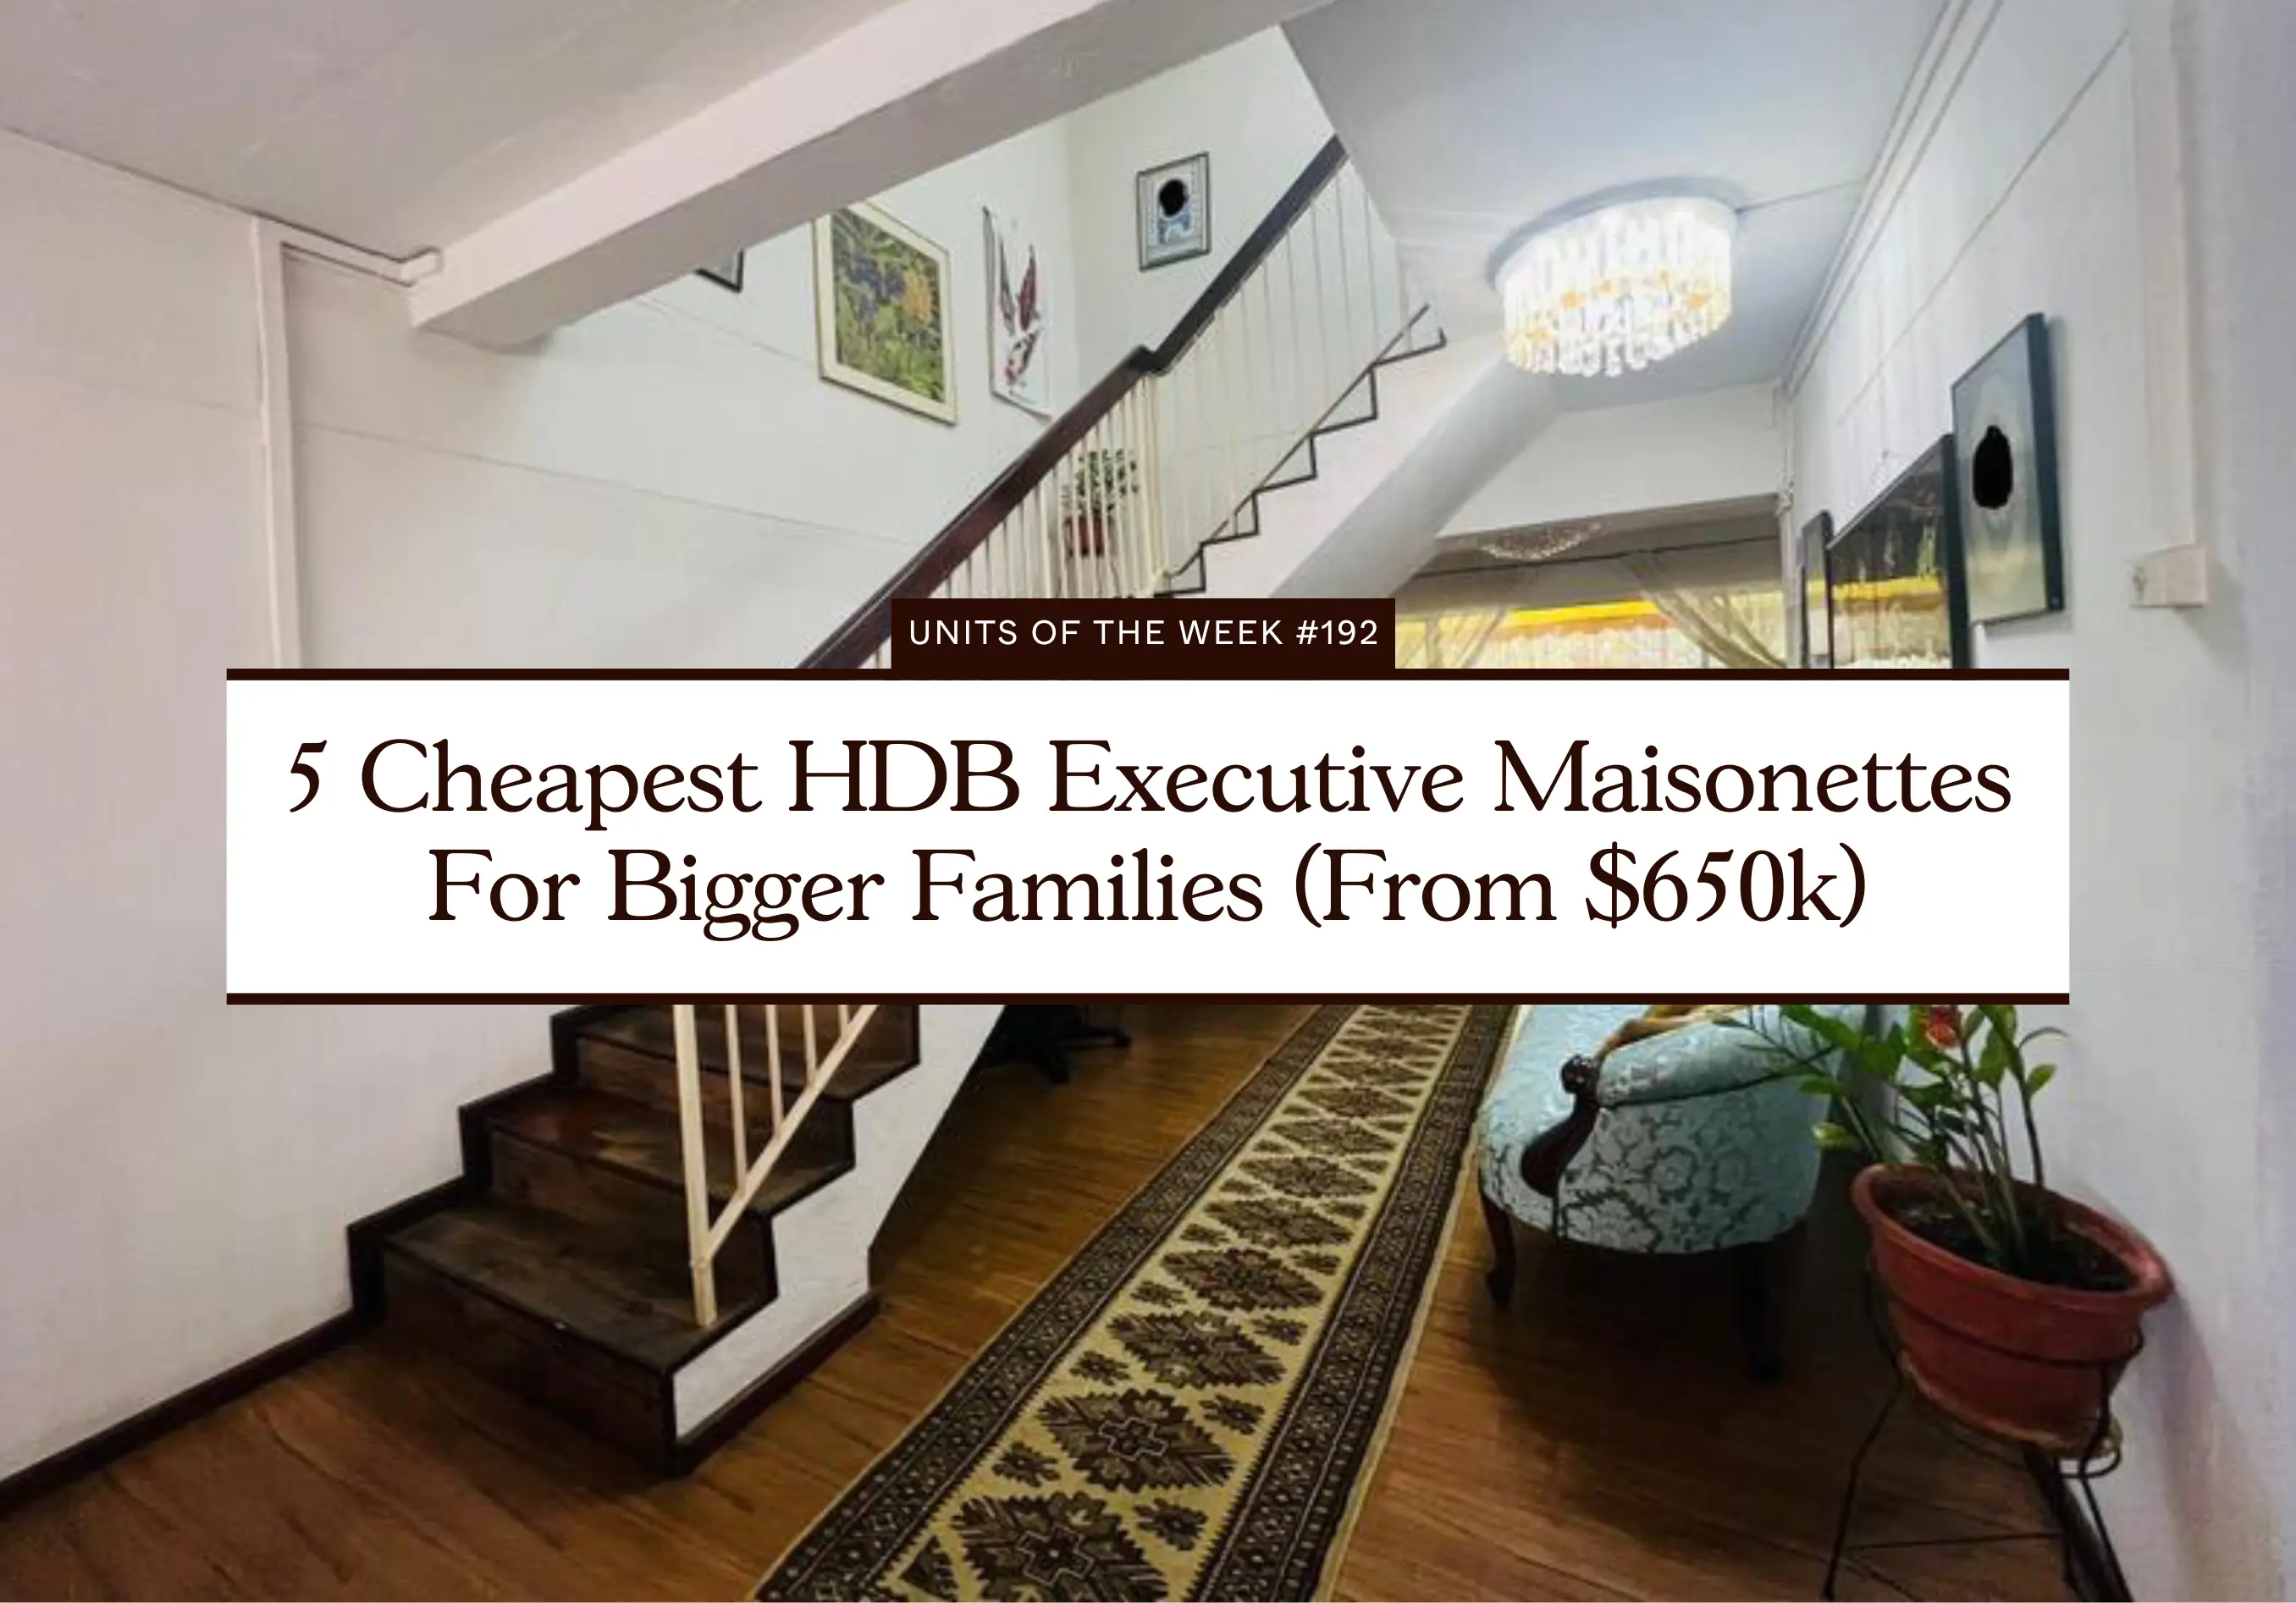 5 Cheapest HDB Executive Maisonettes For Bigger Families (From $650k)